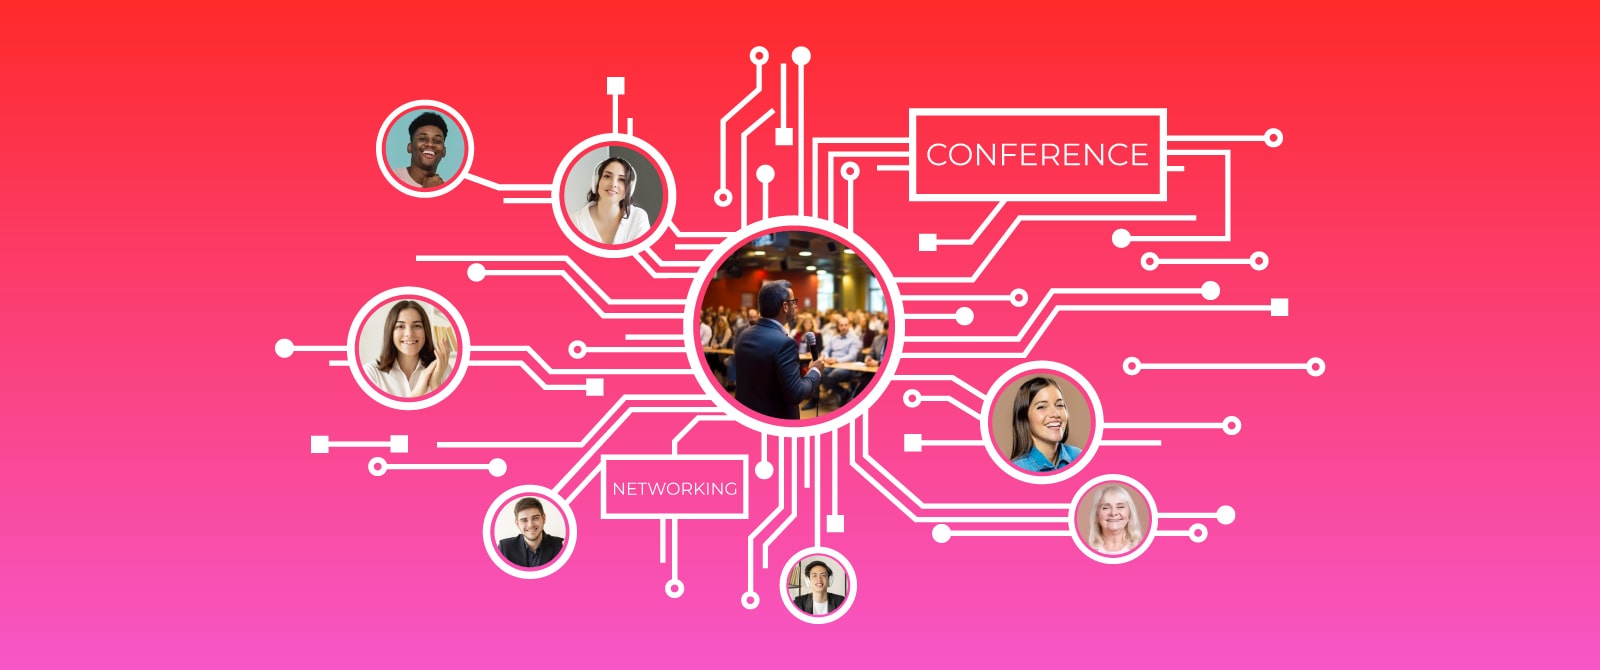 Why Organizers Use Conference Networking Apps for Seamless Connections